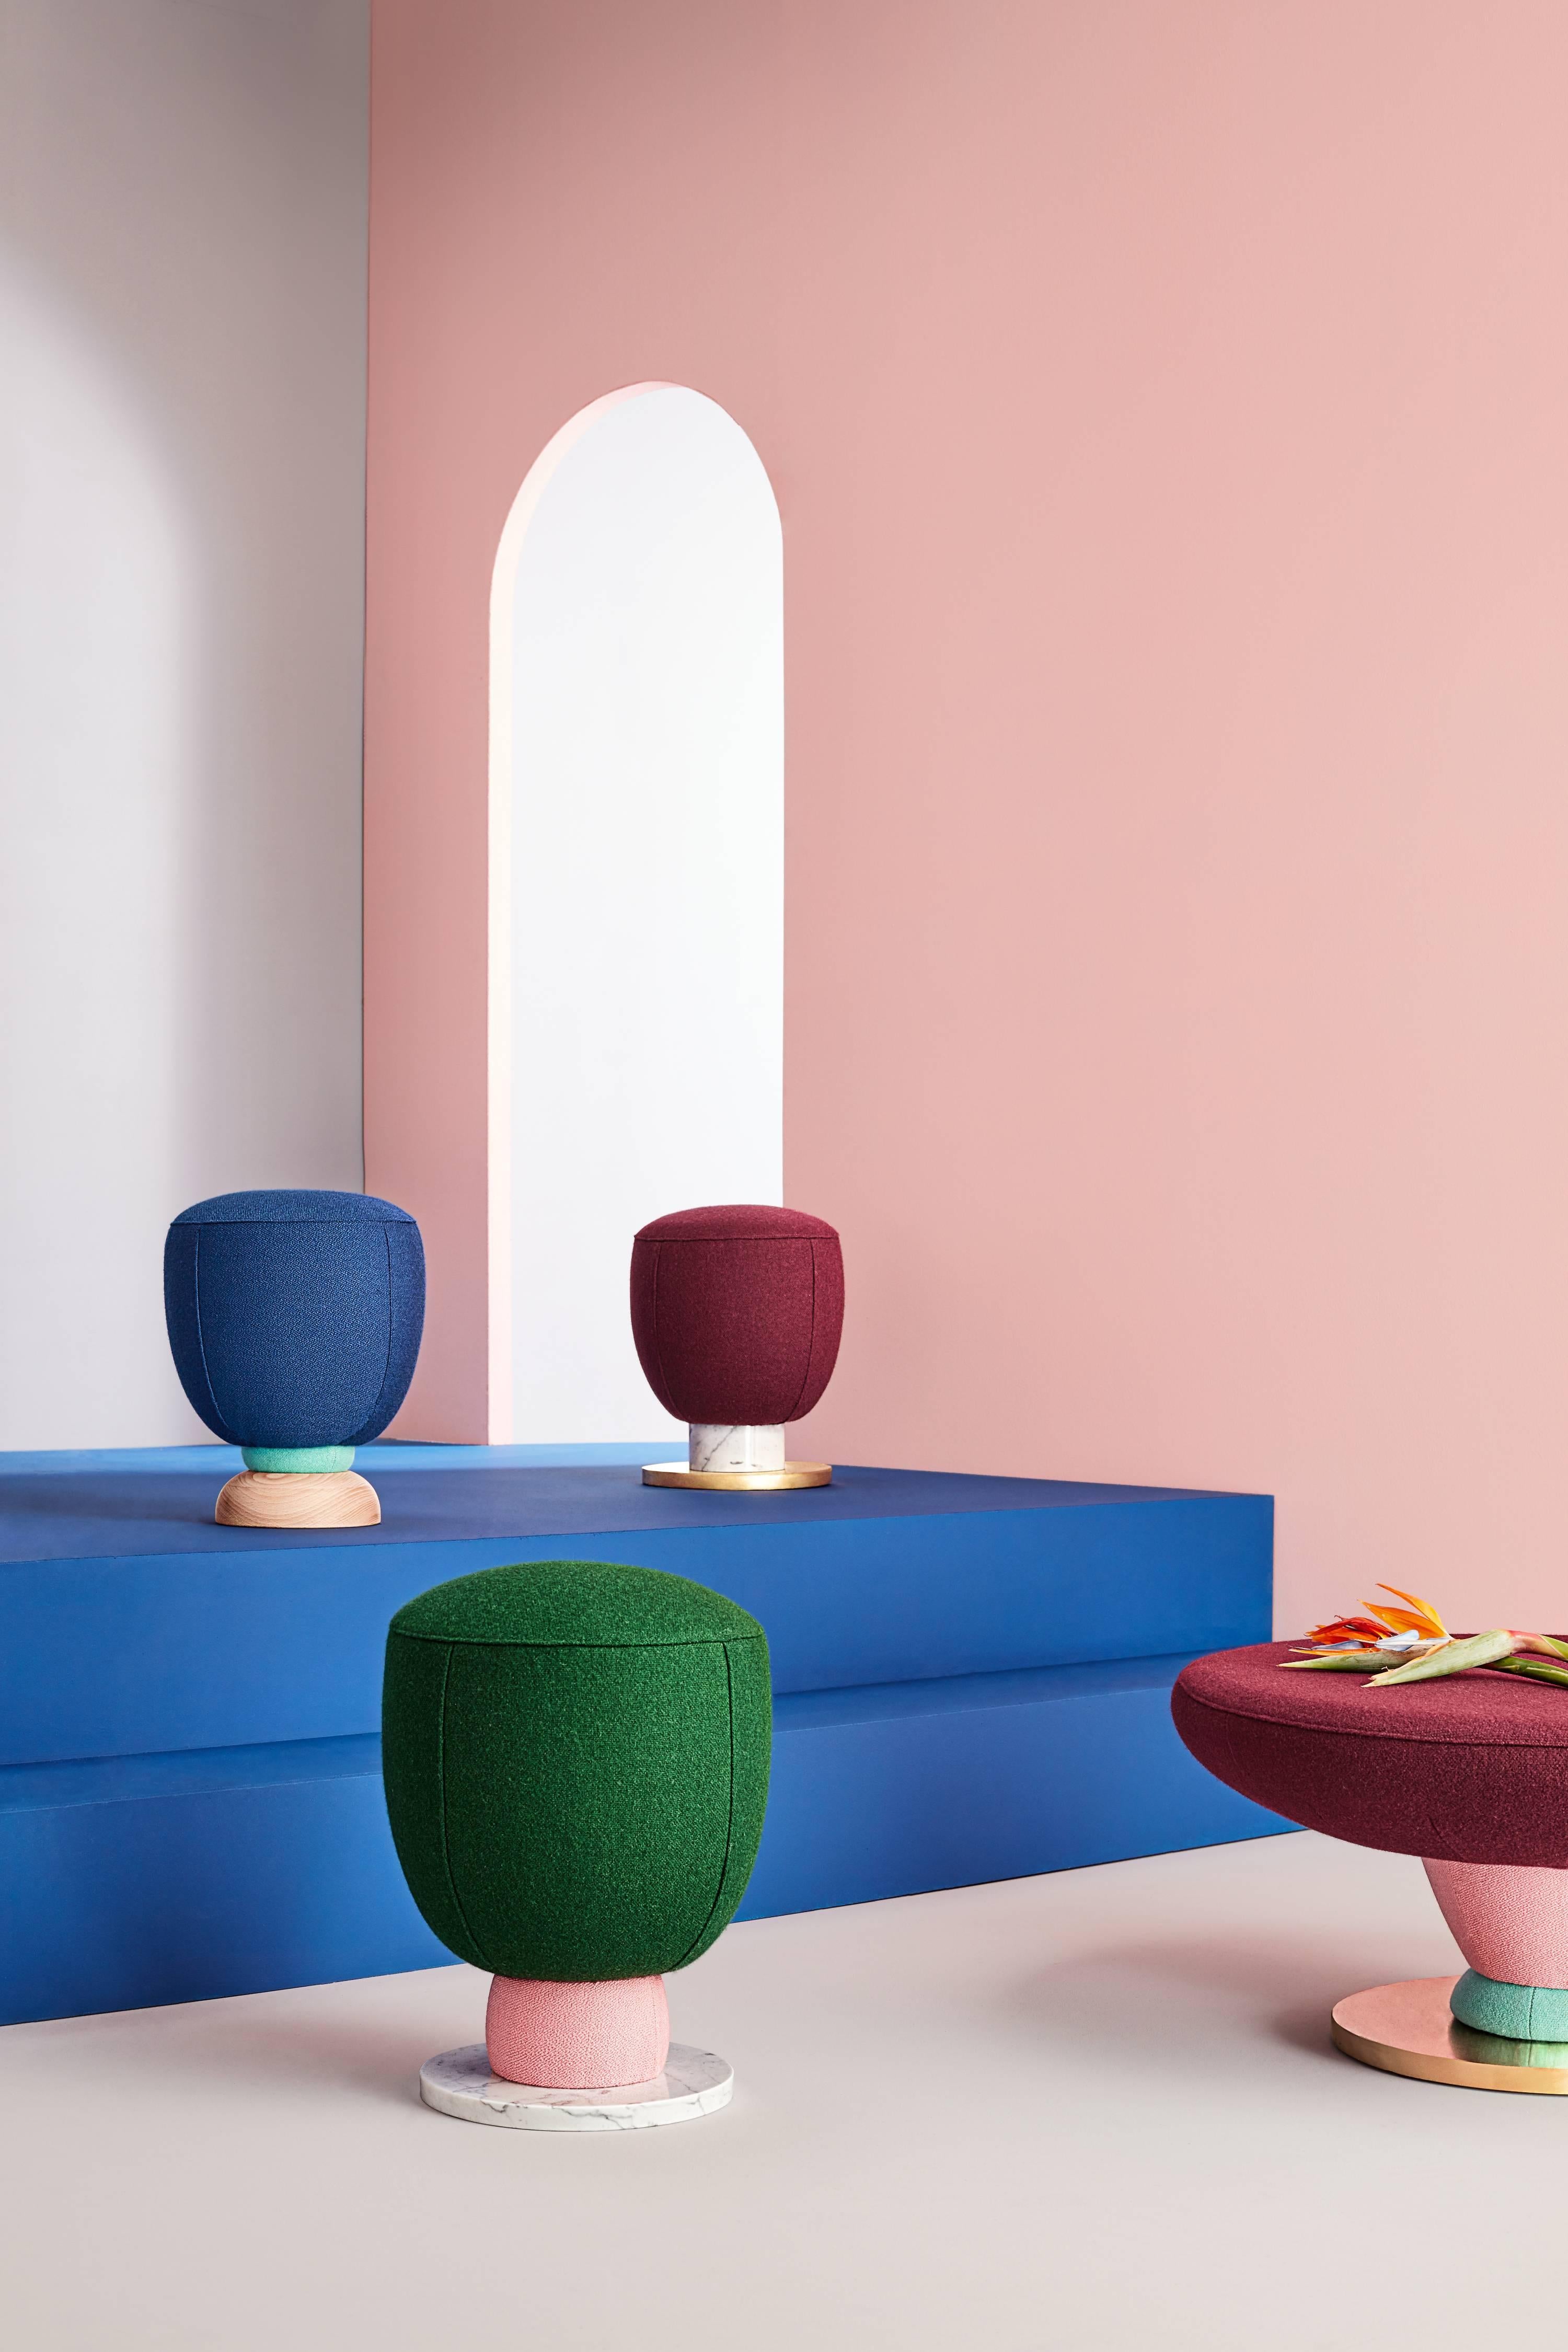 Toadstool collection blue puff Masquespacio

This collection of puffs, table and sofa bench designed by Masquespacio is inspired in the visual culture and graphic design always present one way
or another in the creative consultancy projects. The